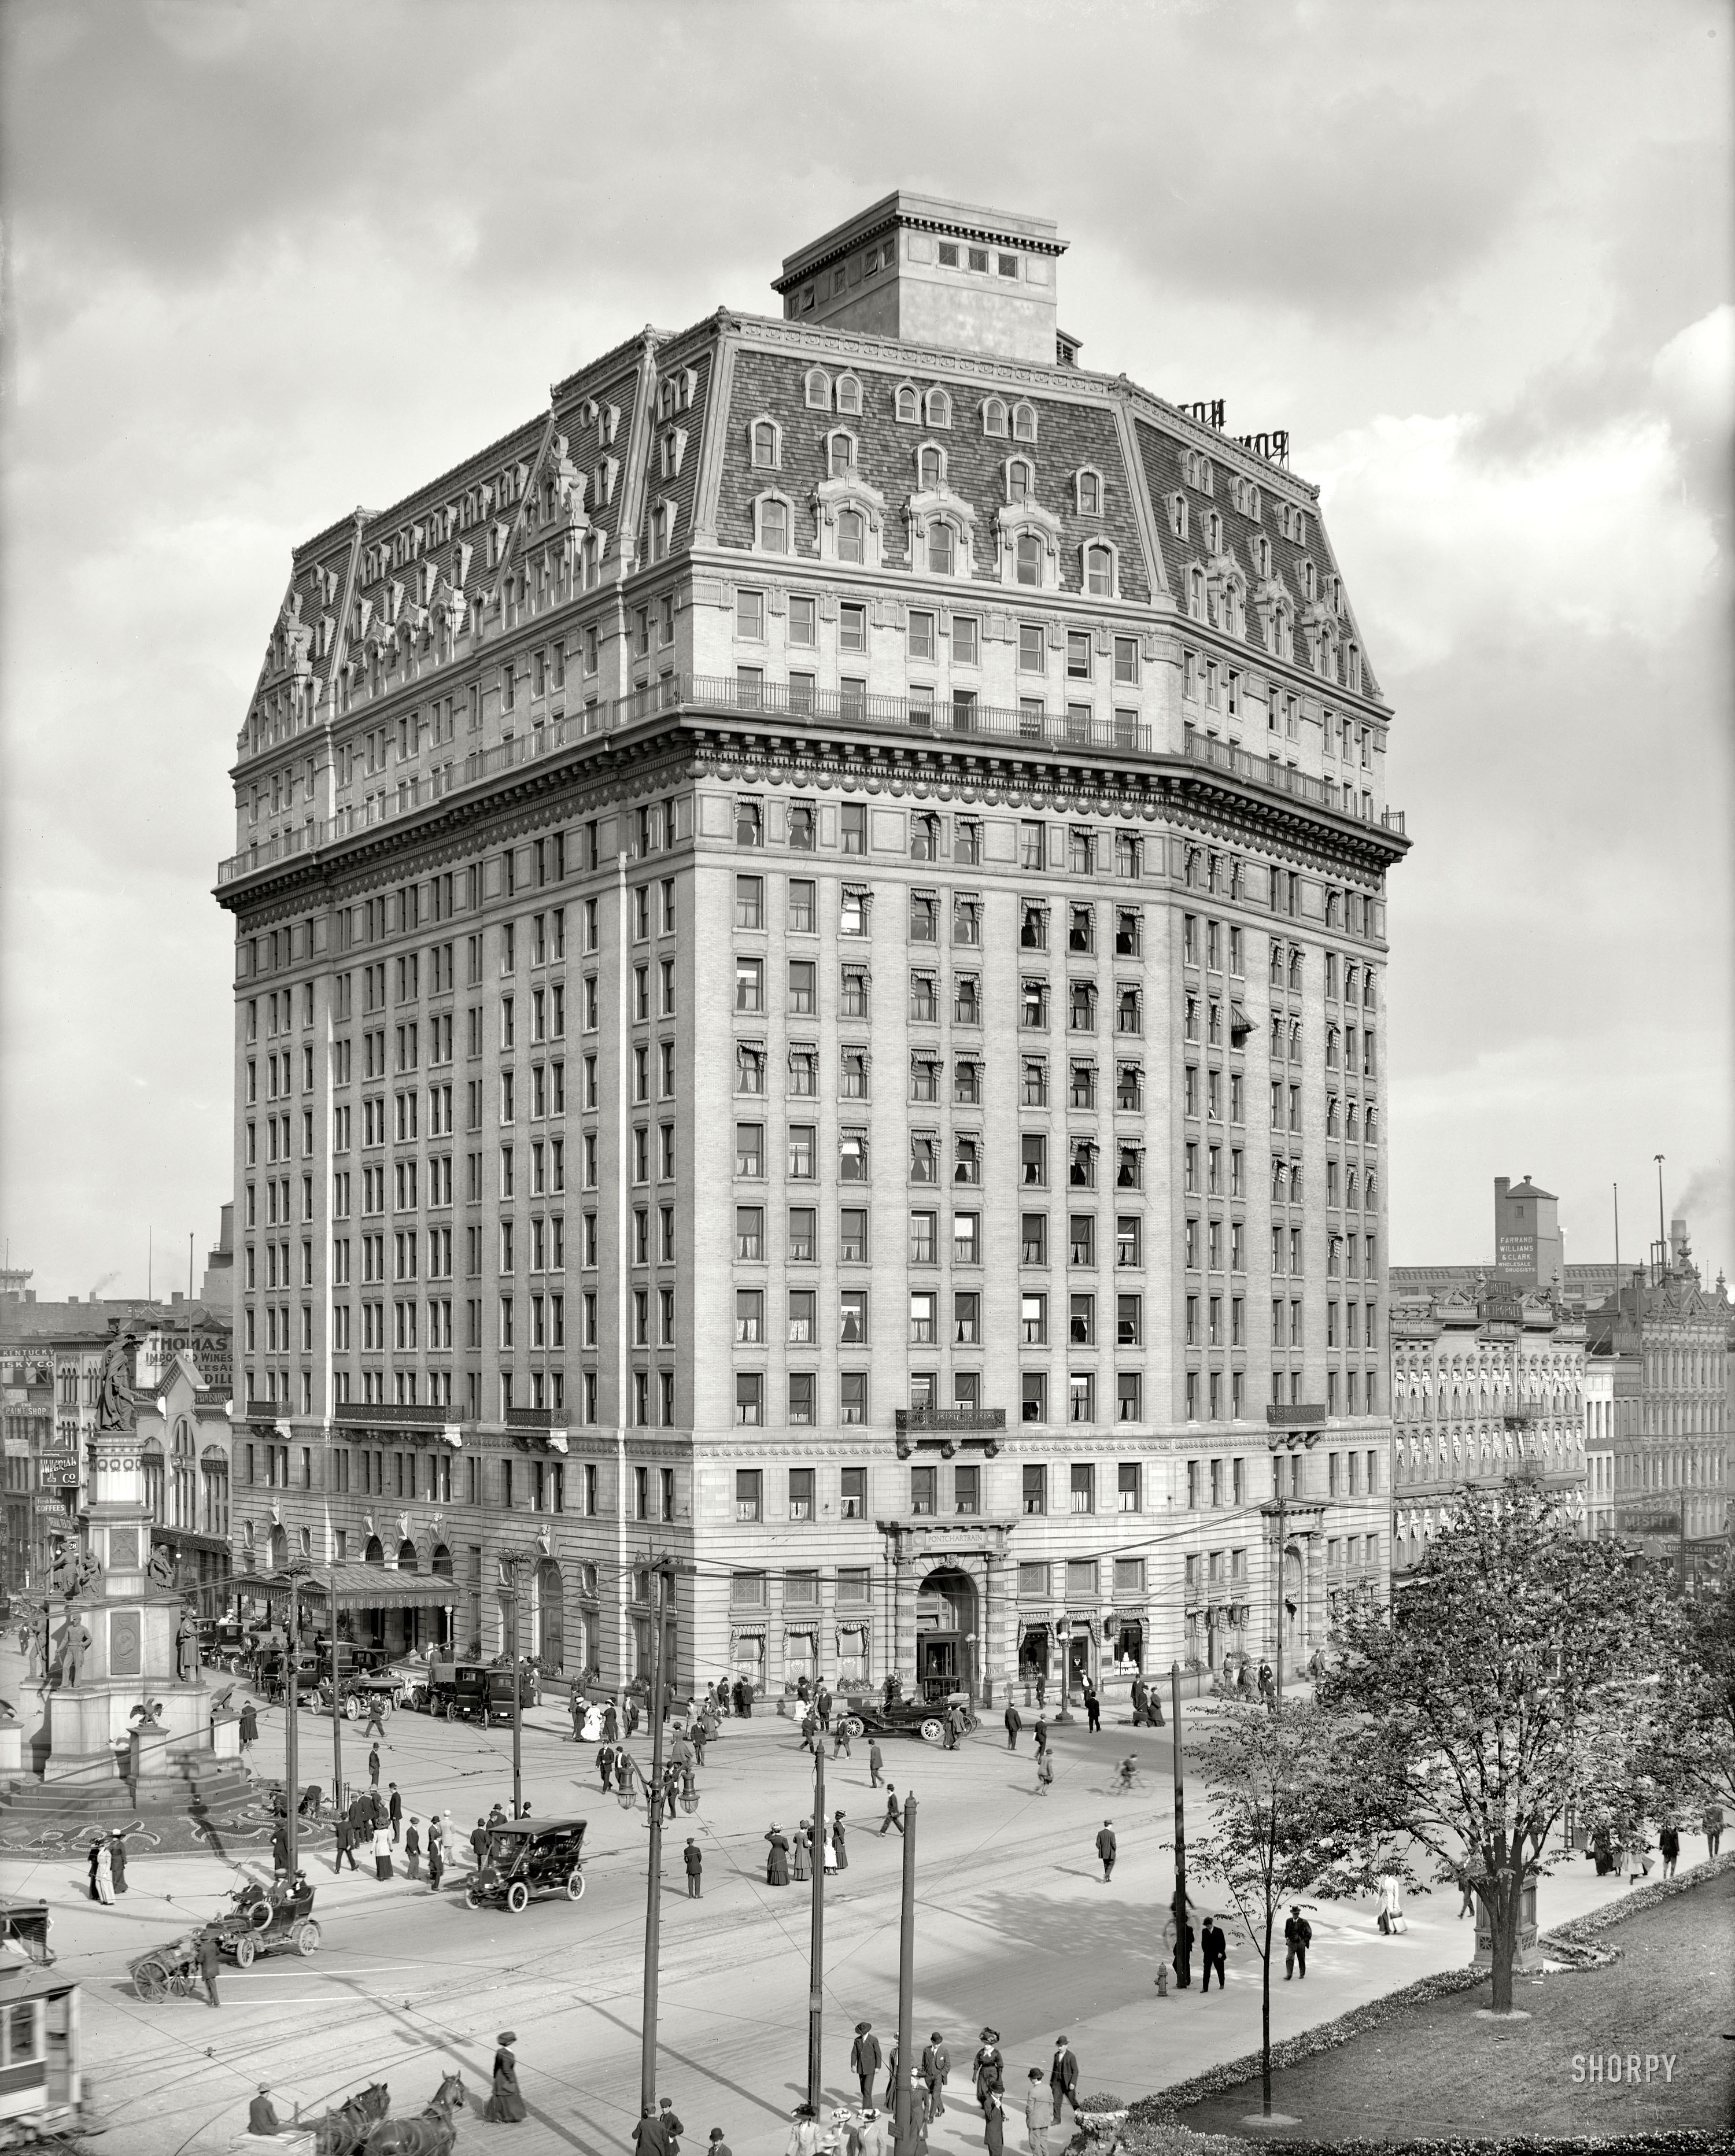 Detroit, Michigan, circa 1912. "Hotel Pontchartrain, Soldiers' and Sailors' Monument." Along with the Flatiron building in New York, "The Pontch" was one of Detroit Publishing's favorite architectural subjects. View full size.